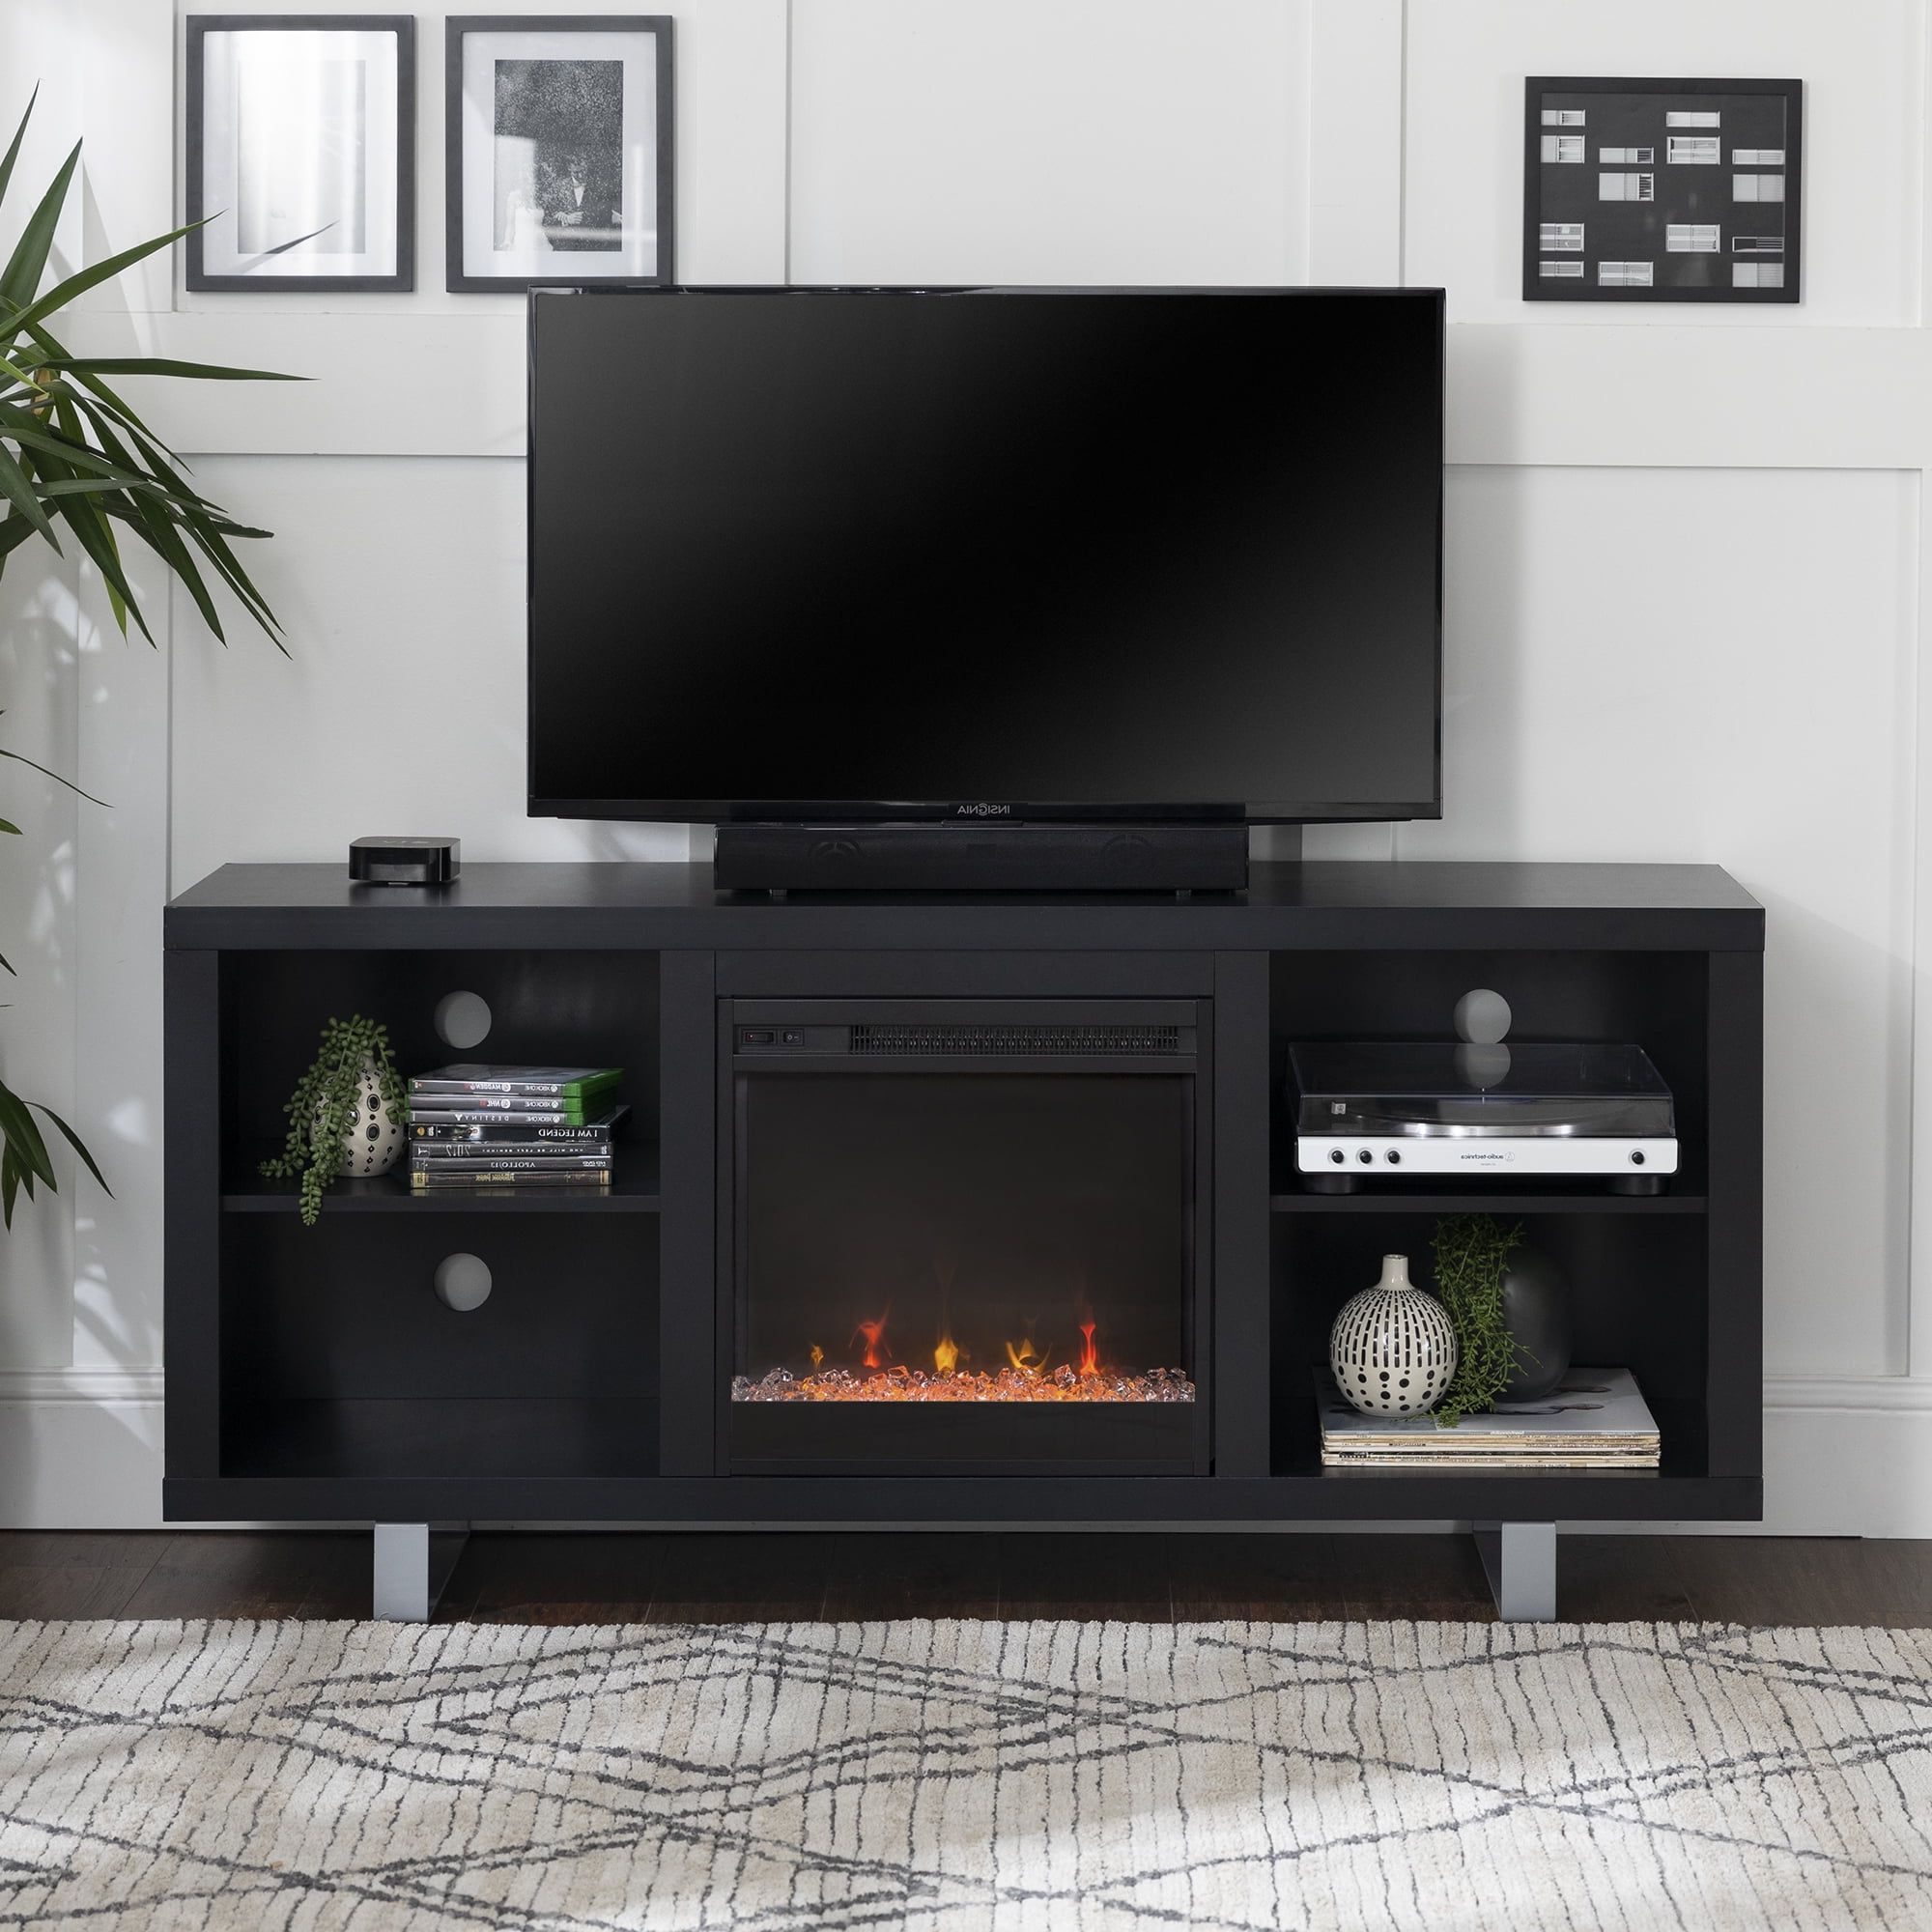 Popular Modern Fireplace Tv Stands With Regard To Manor Park Modern Fireplace Tv Stand For Tvs Up To 64", Black – Walmart (View 14 of 15)